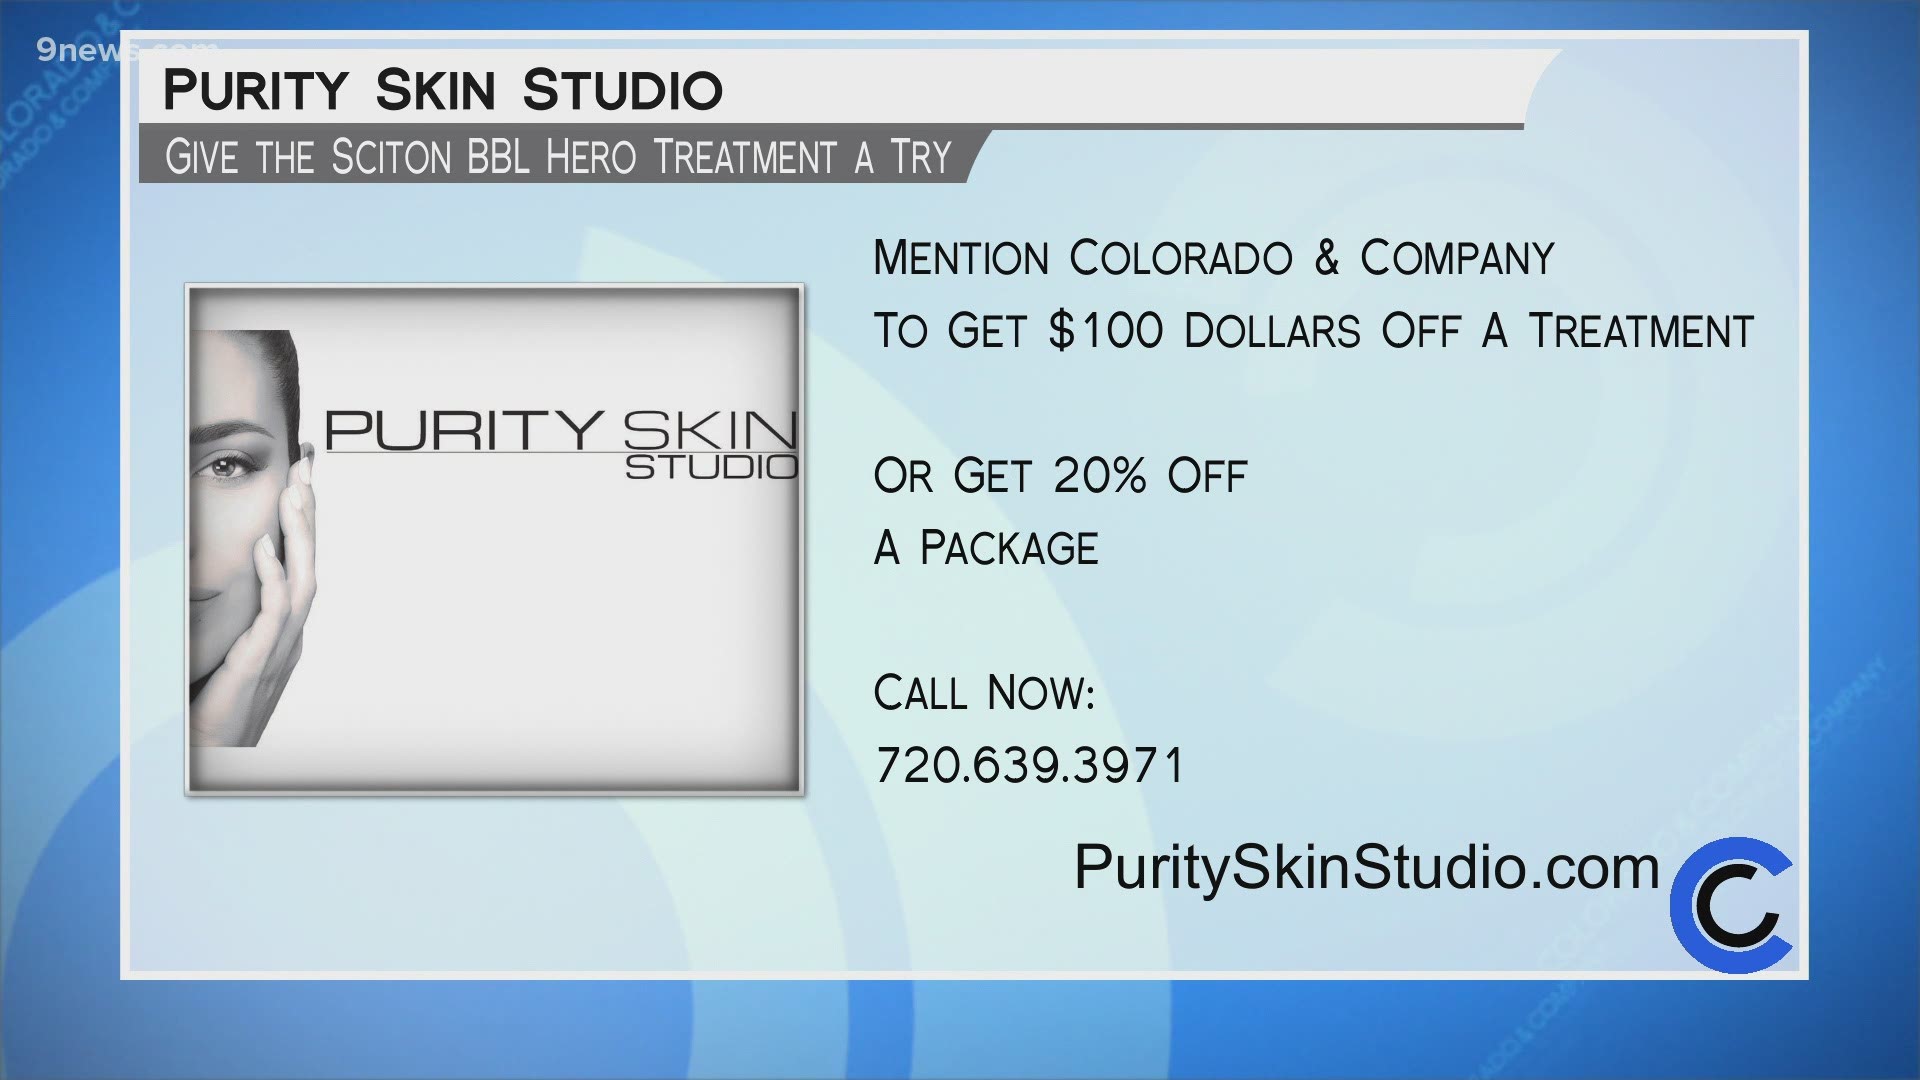 Mention Colorado and Company for $100 off any treatment or get 20% off a package! Learn more and get started at PuritySkinStudio.com or call 720.639.3971.